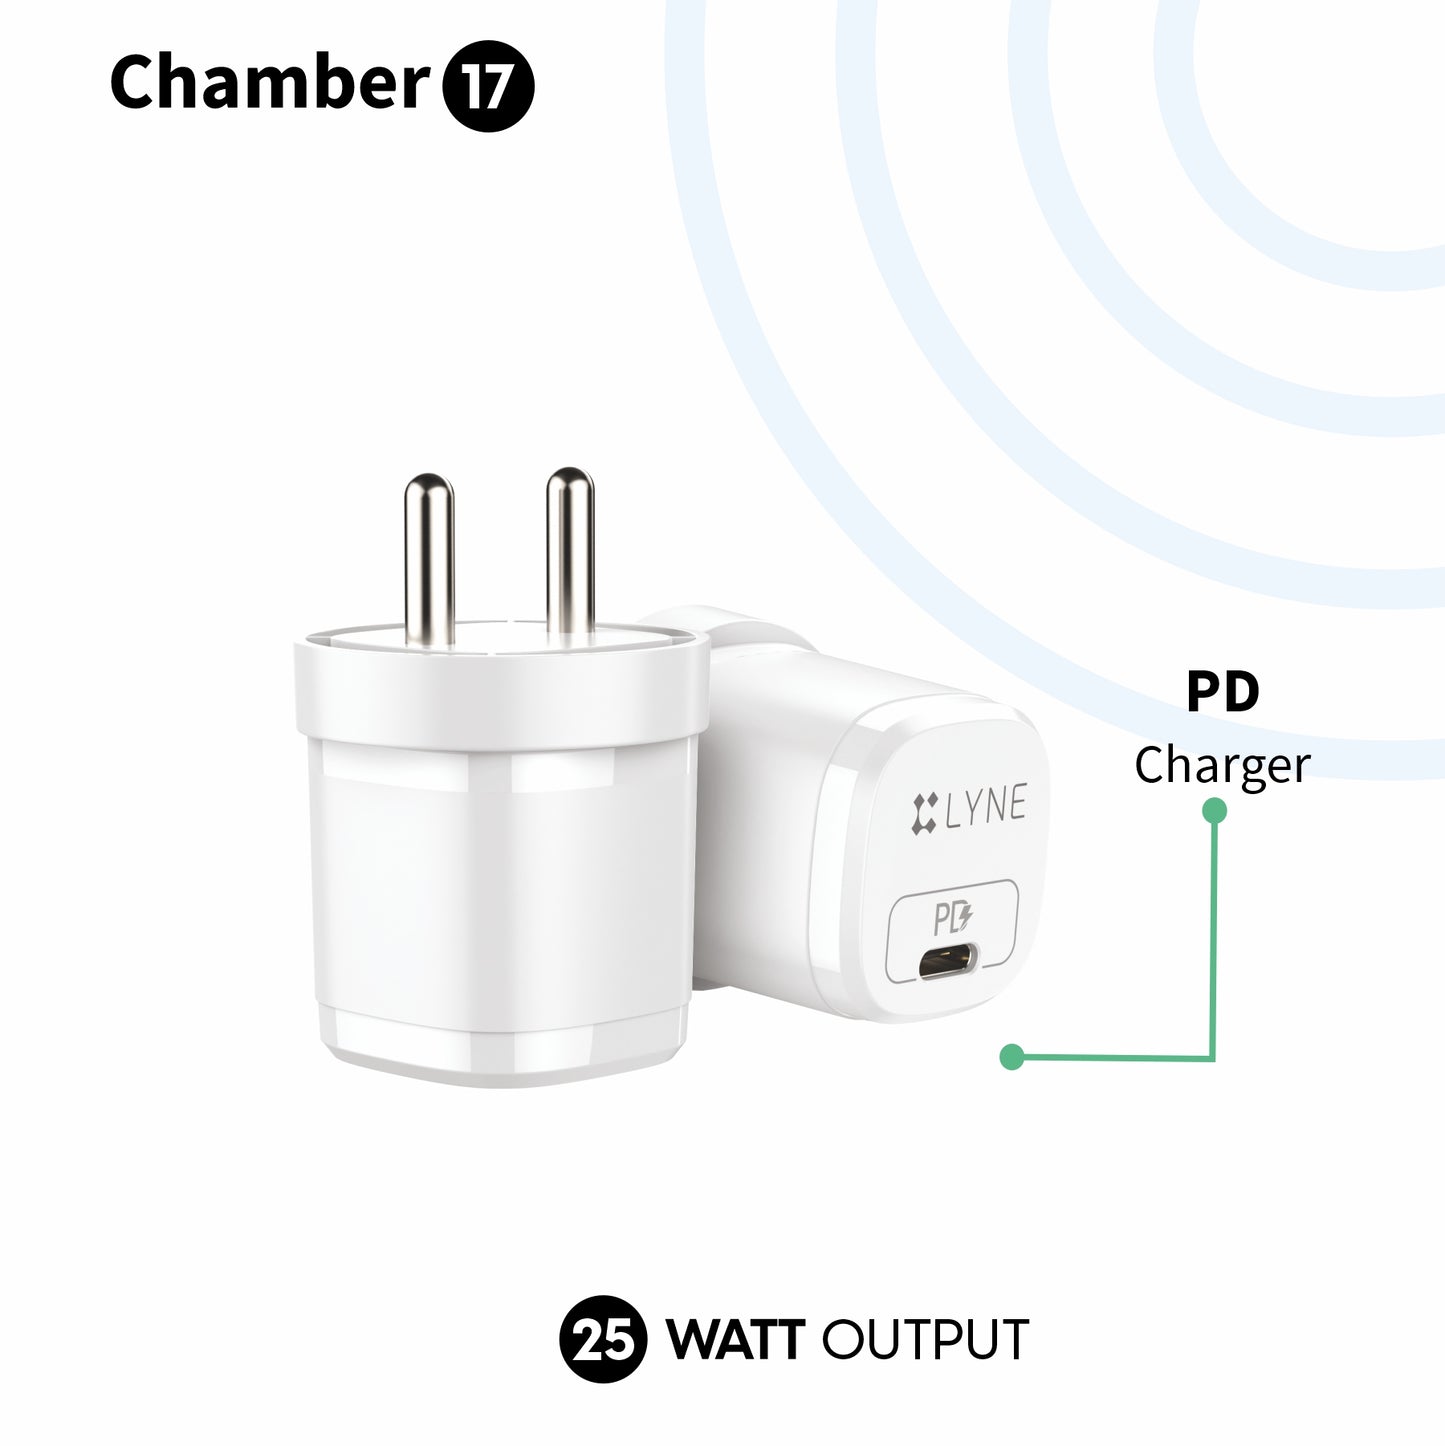 LYNE Chamber 17 25W Output, PD Charger, All in One Charger with Type-C to Type-C cable